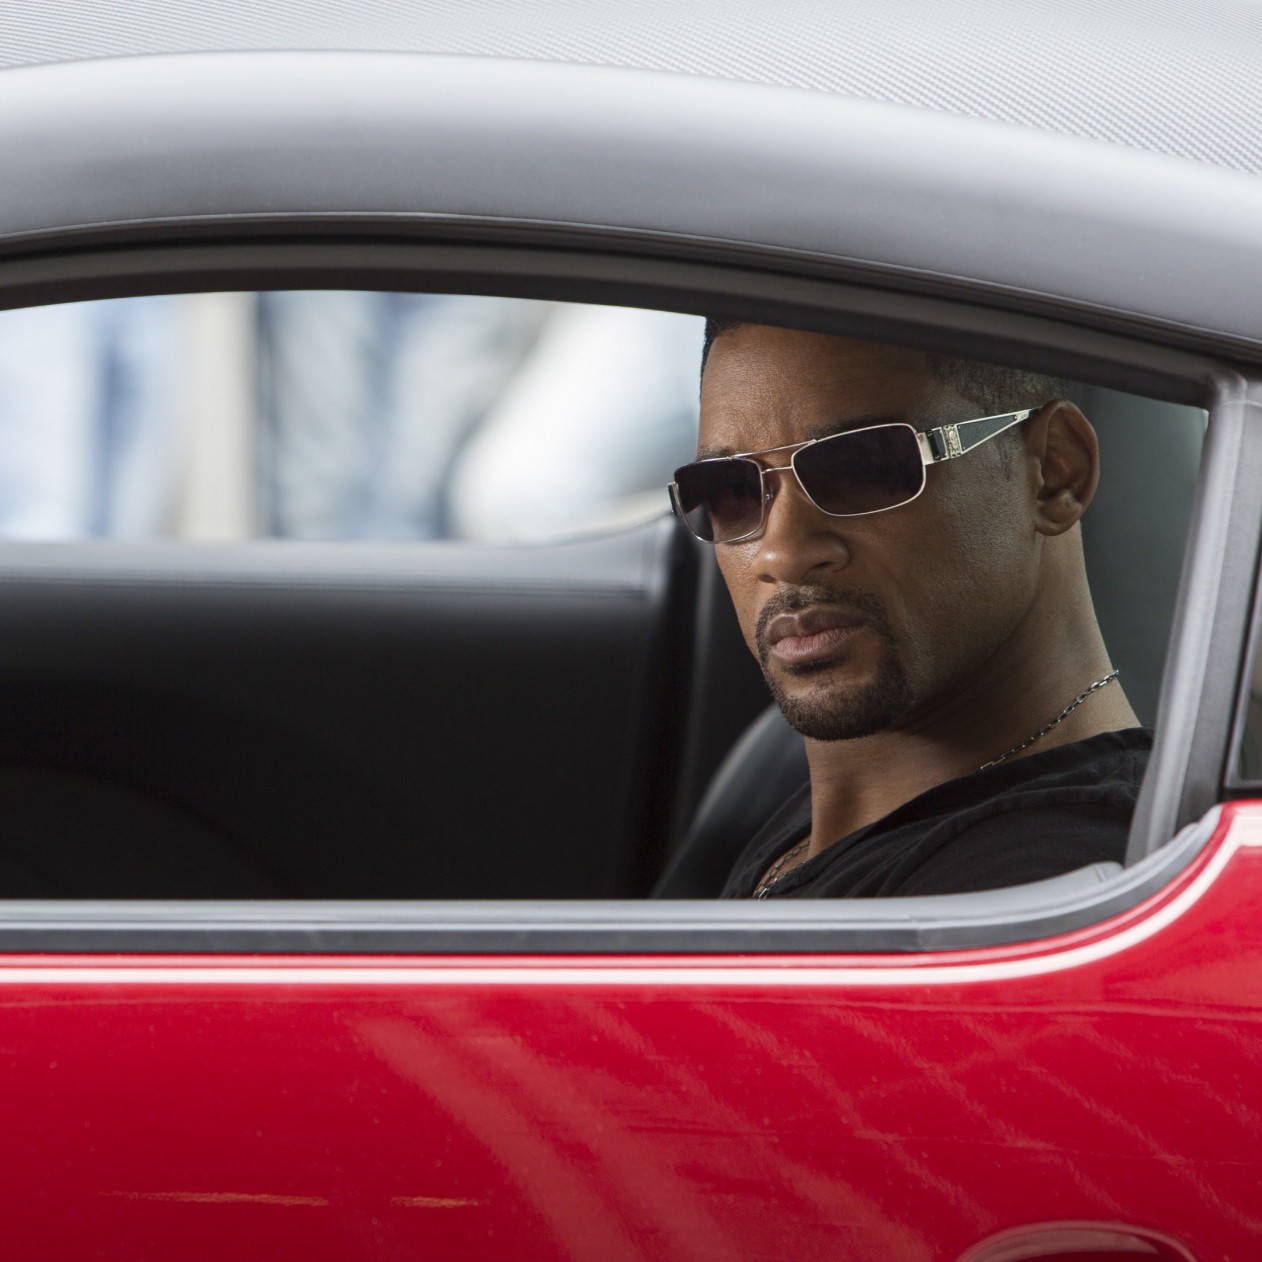 Will Smith at the shooting of "Focus" Wallpaper for Apple iPad mini